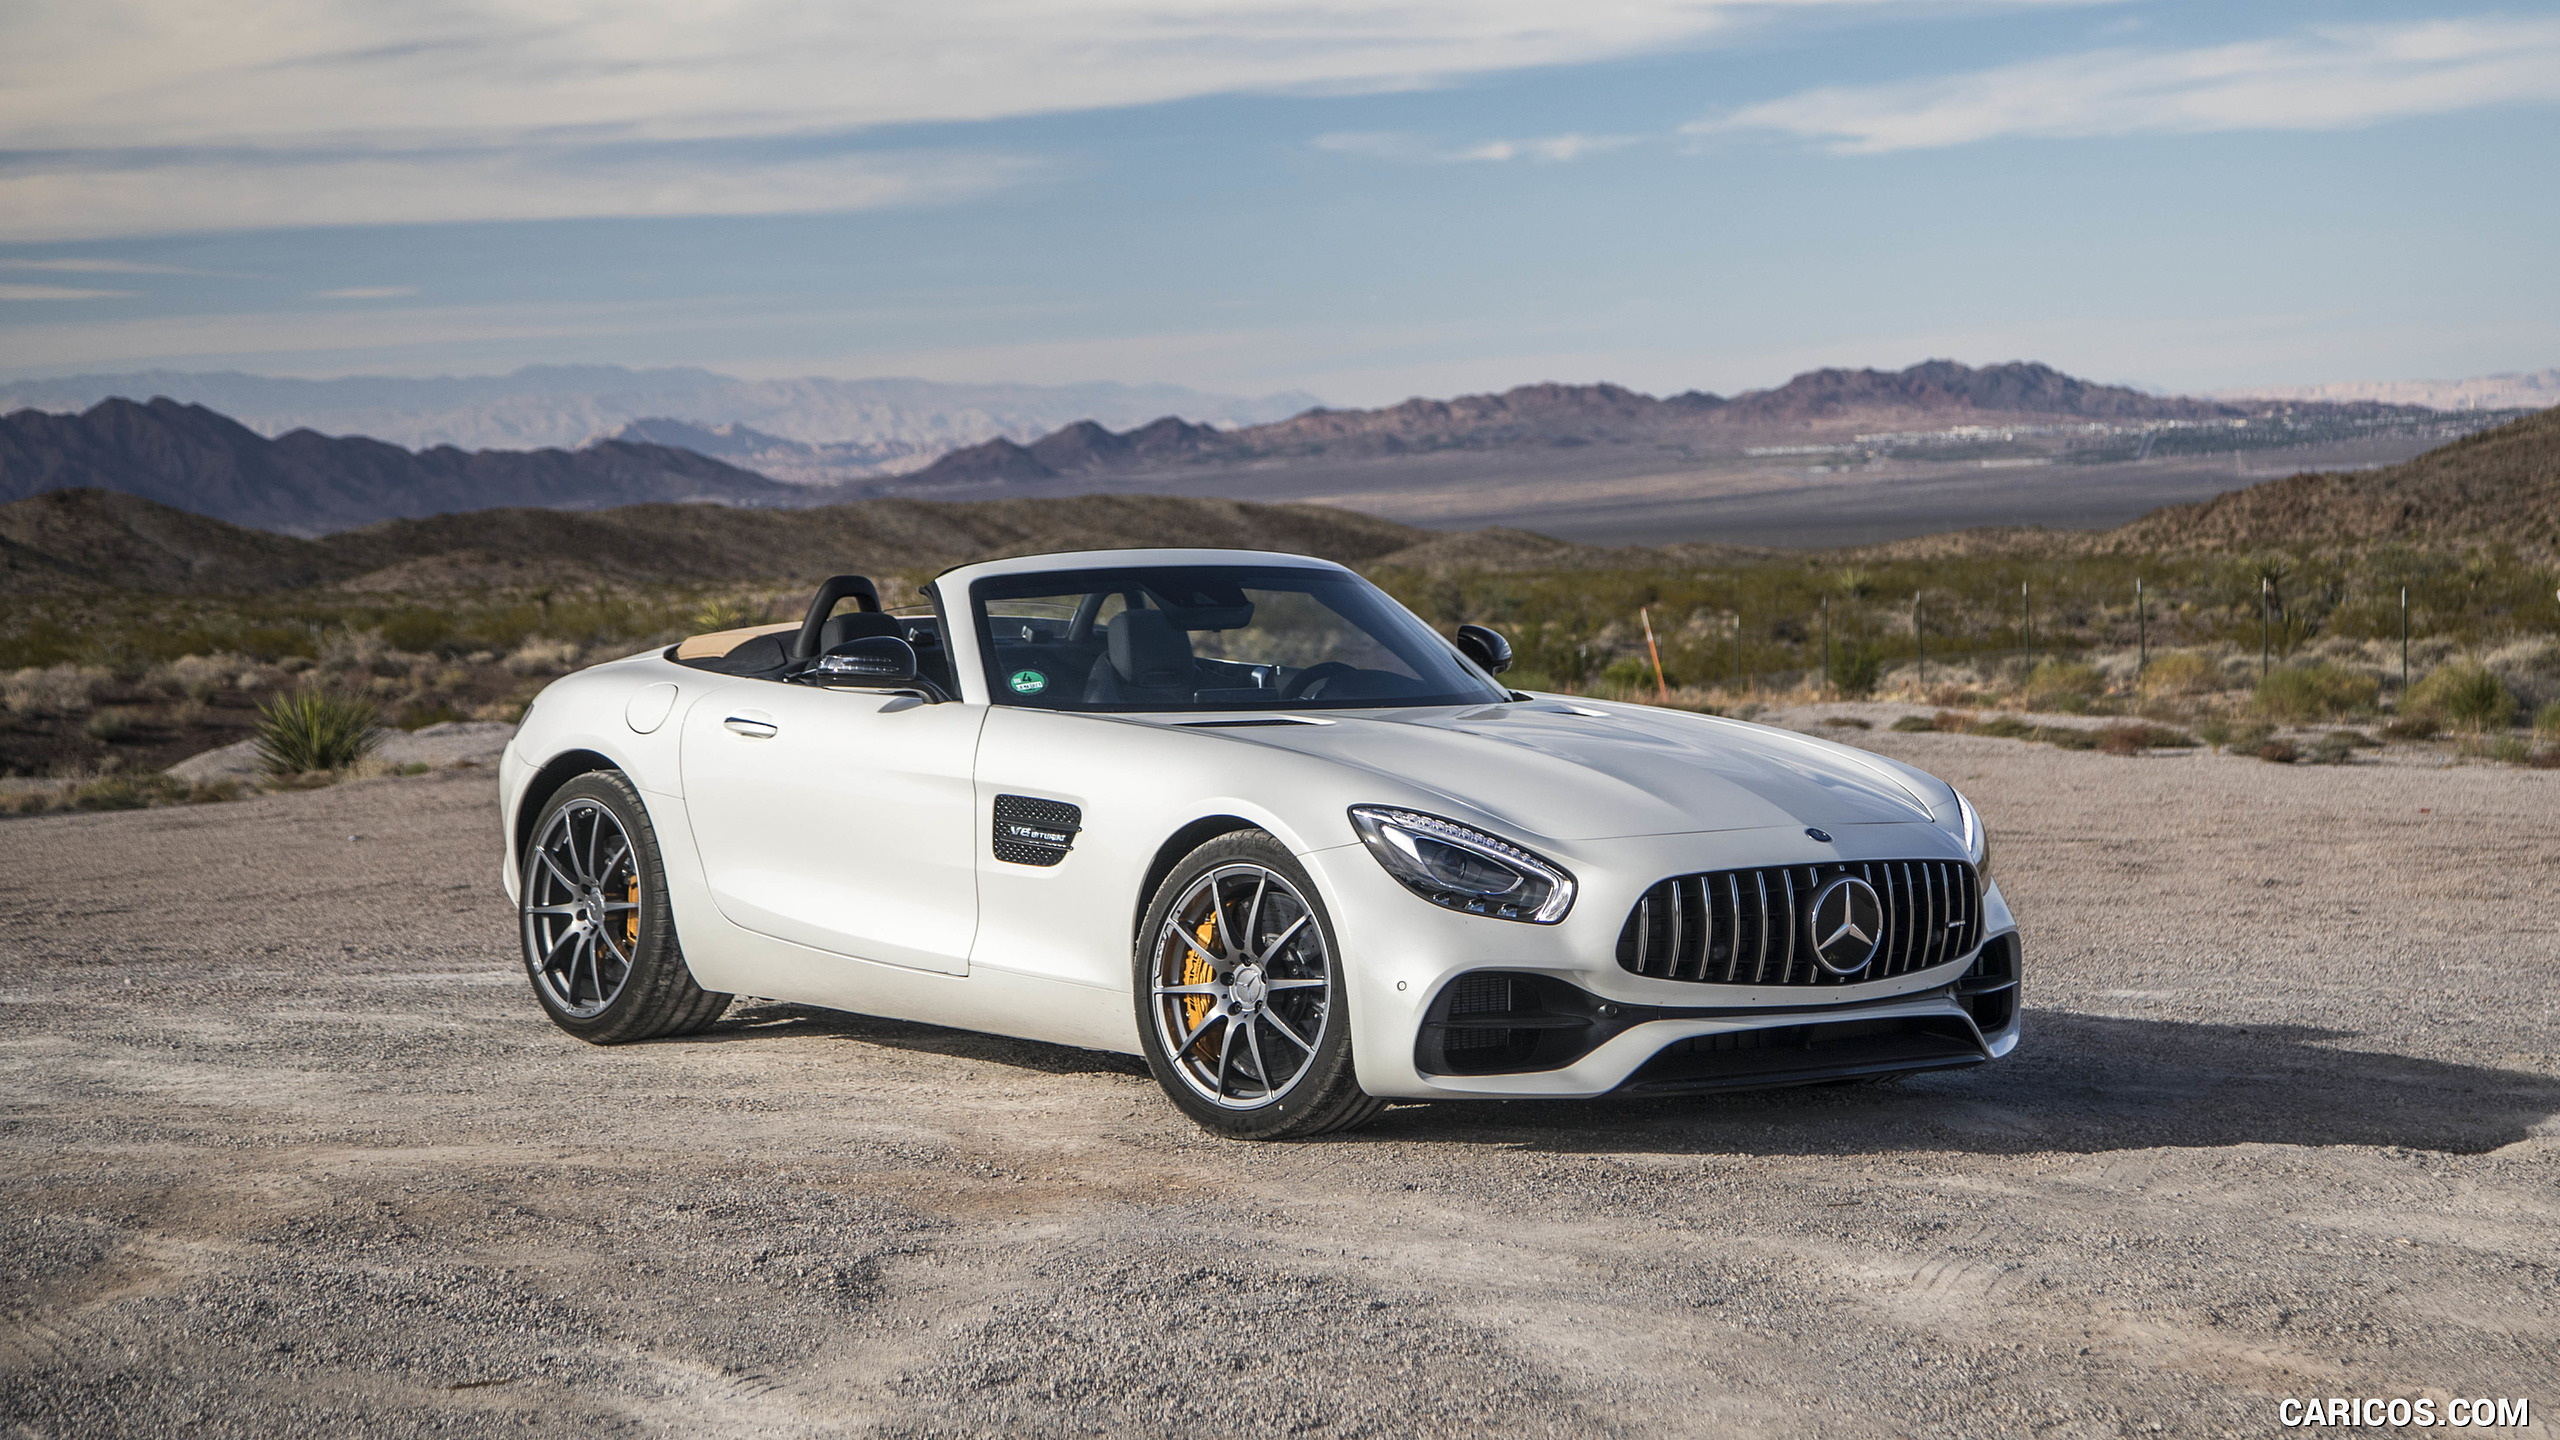 2018 Mercedes-AMG GT Roadster - Front Three-Quarter, #96 of 350